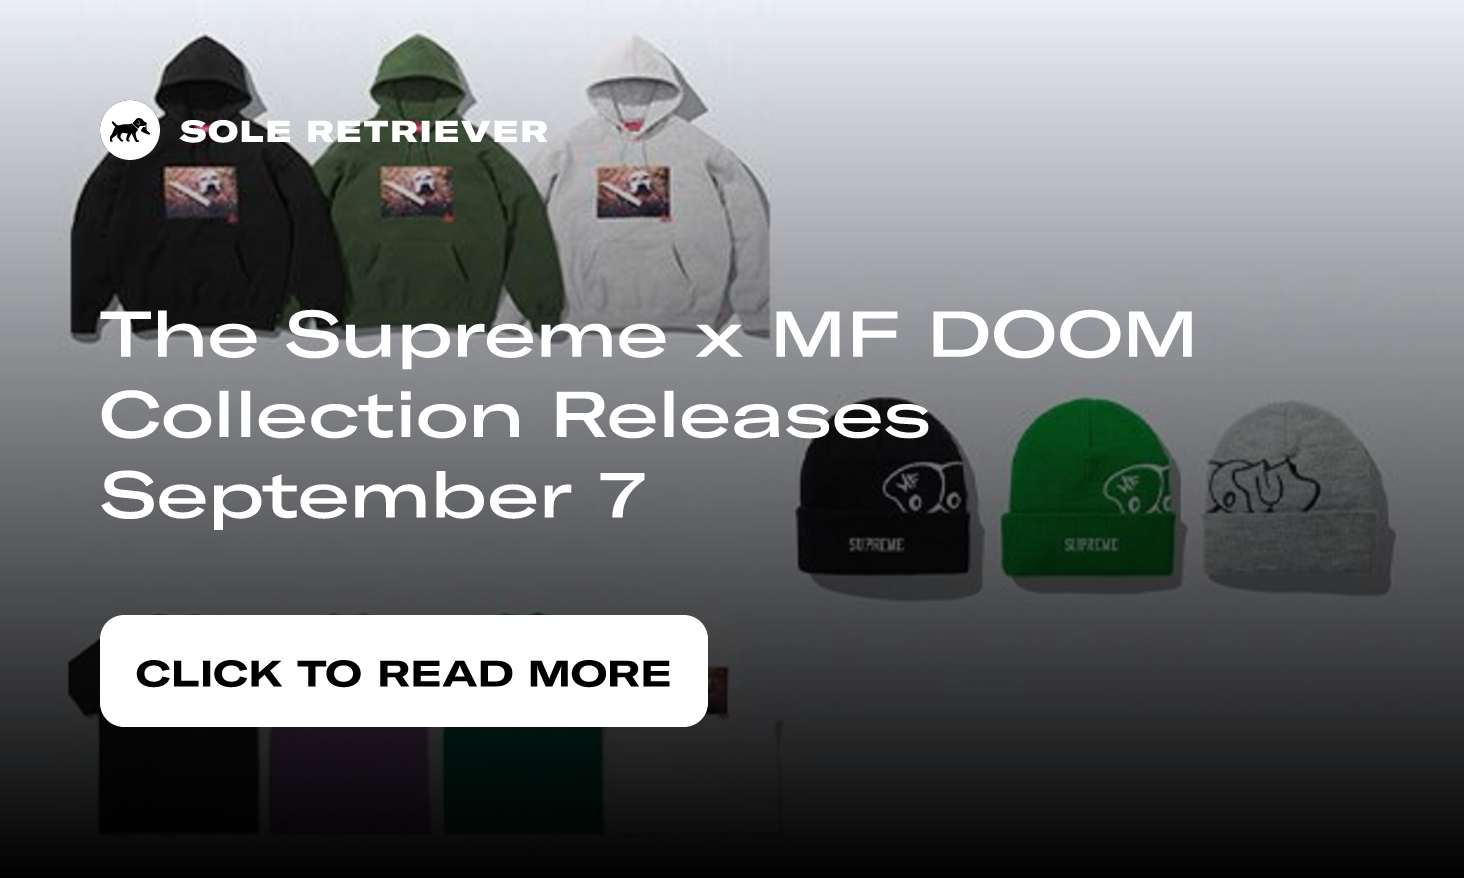 Supreme has worked with the MF DOOM estate on a collection for